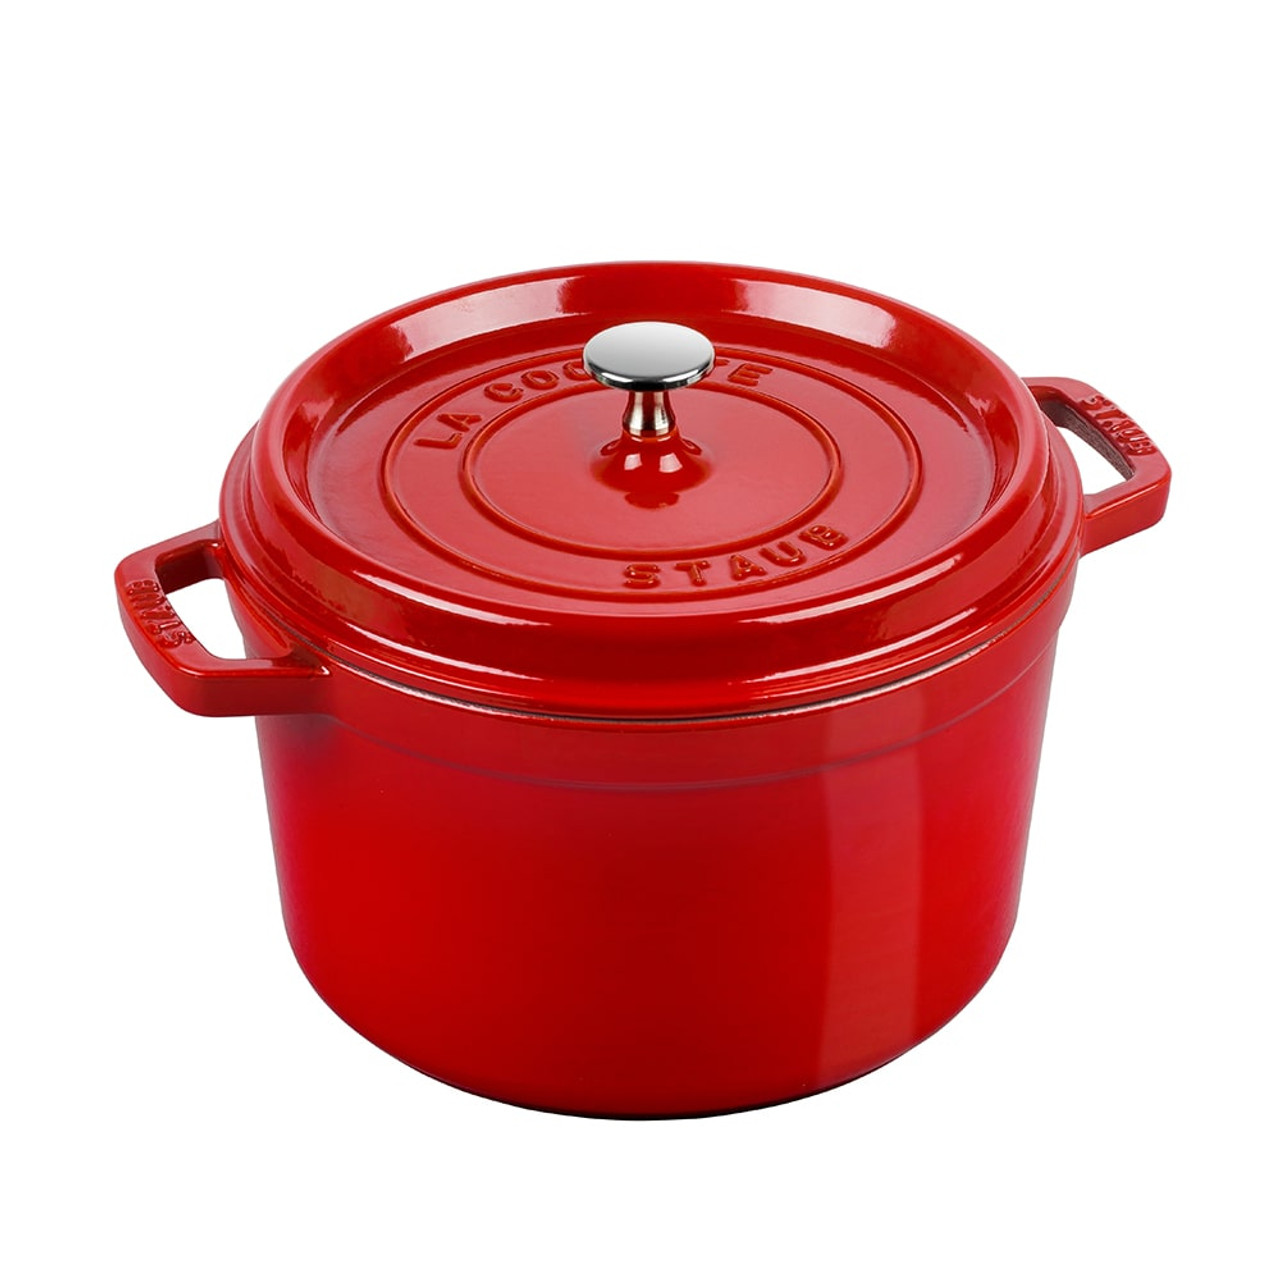 https://cdn11.bigcommerce.com/s-hccytny0od/images/stencil/1280x1280/products/5757/25342/staub-cast-iron-tall-cocotte-cherry__64316.1702576200.jpg?c=2?imbypass=on